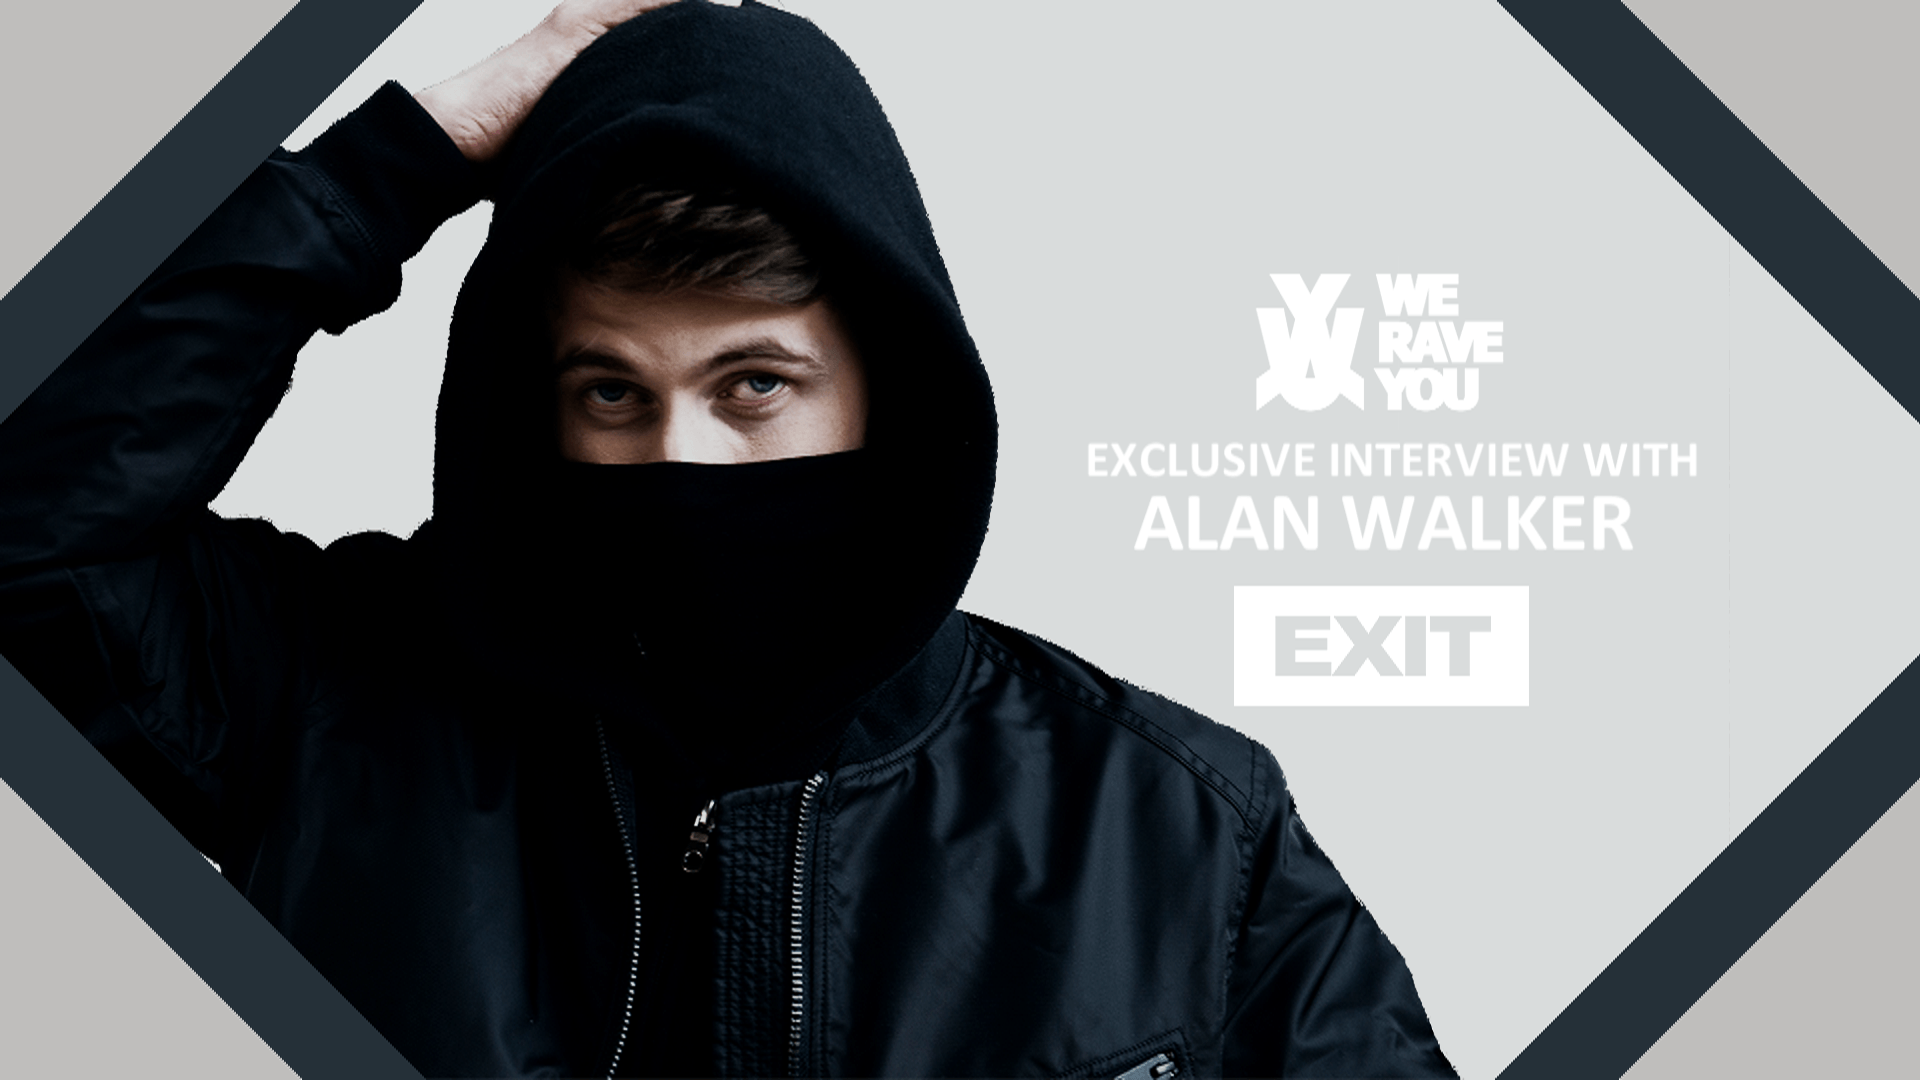 Alan Walker talks music, breakthrough hit “Faded” and future plans